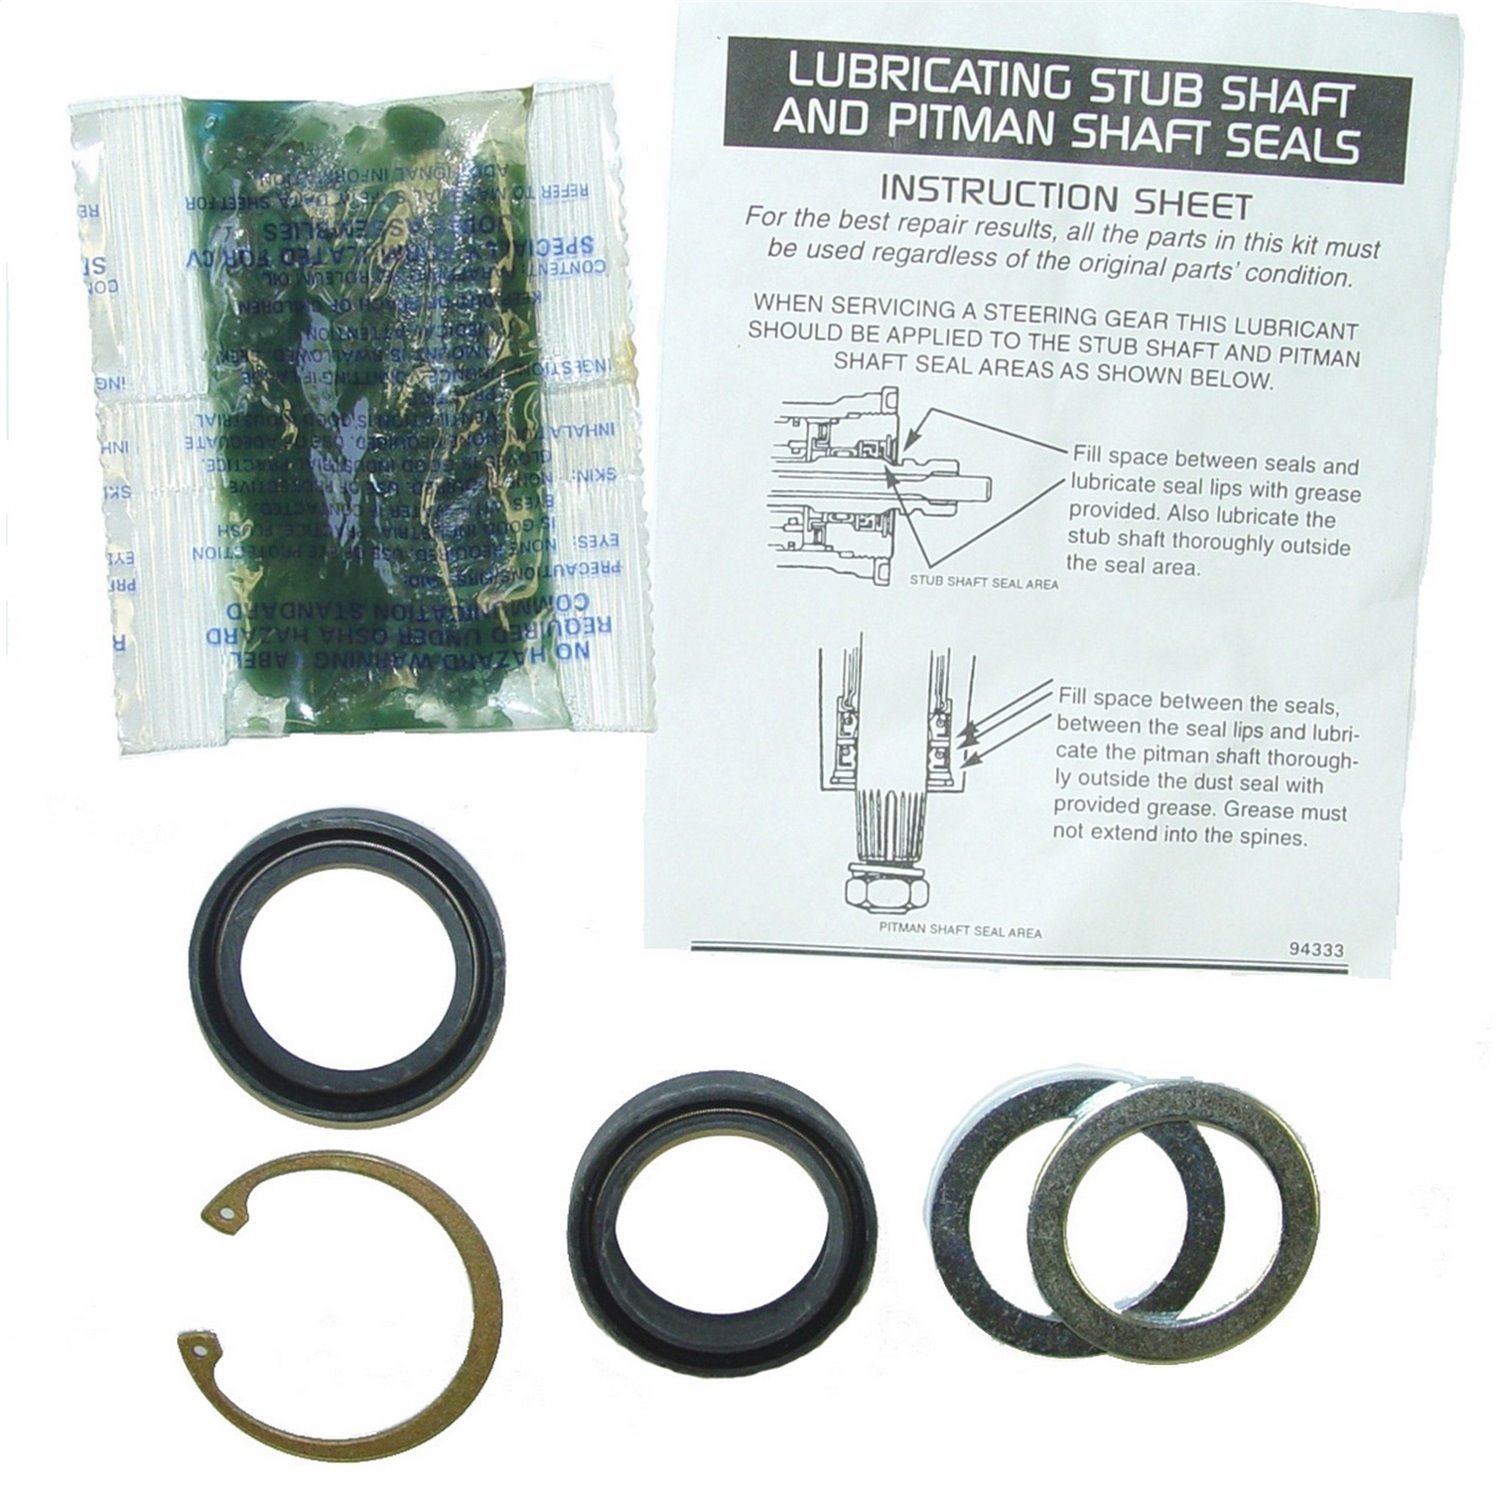 This lower power steering seal kit from Omix-ADA